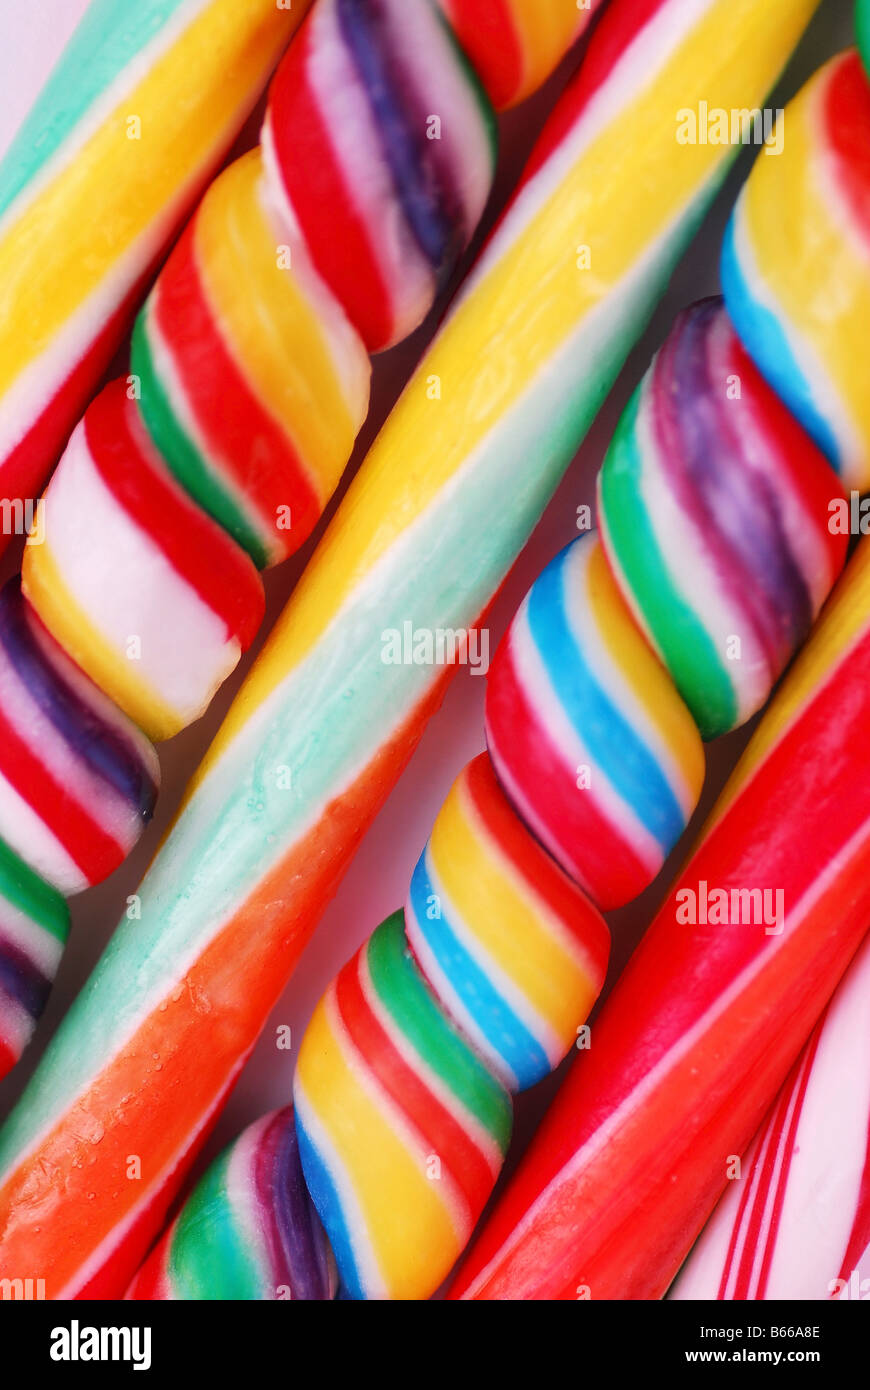 A range of coloured sweets typical seaside sweets Stock Photo